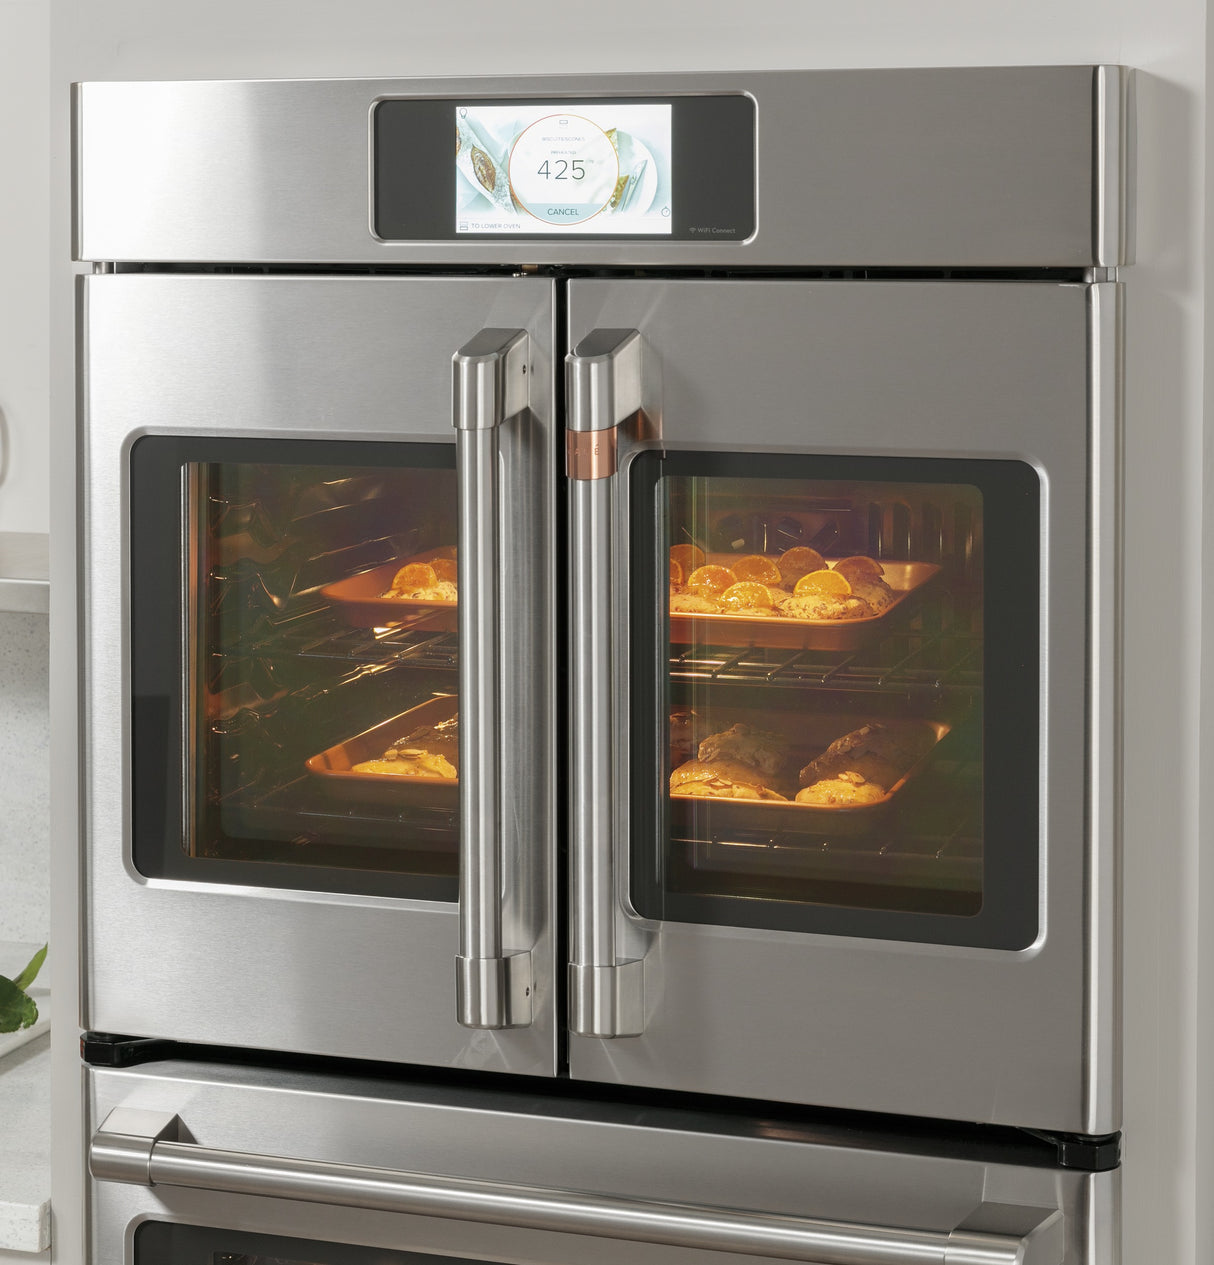 Caf(eback)(TM) Professional Series 30" Smart Built-In Convection French-Door Double Wall Oven - (CTD90FP3ND1)